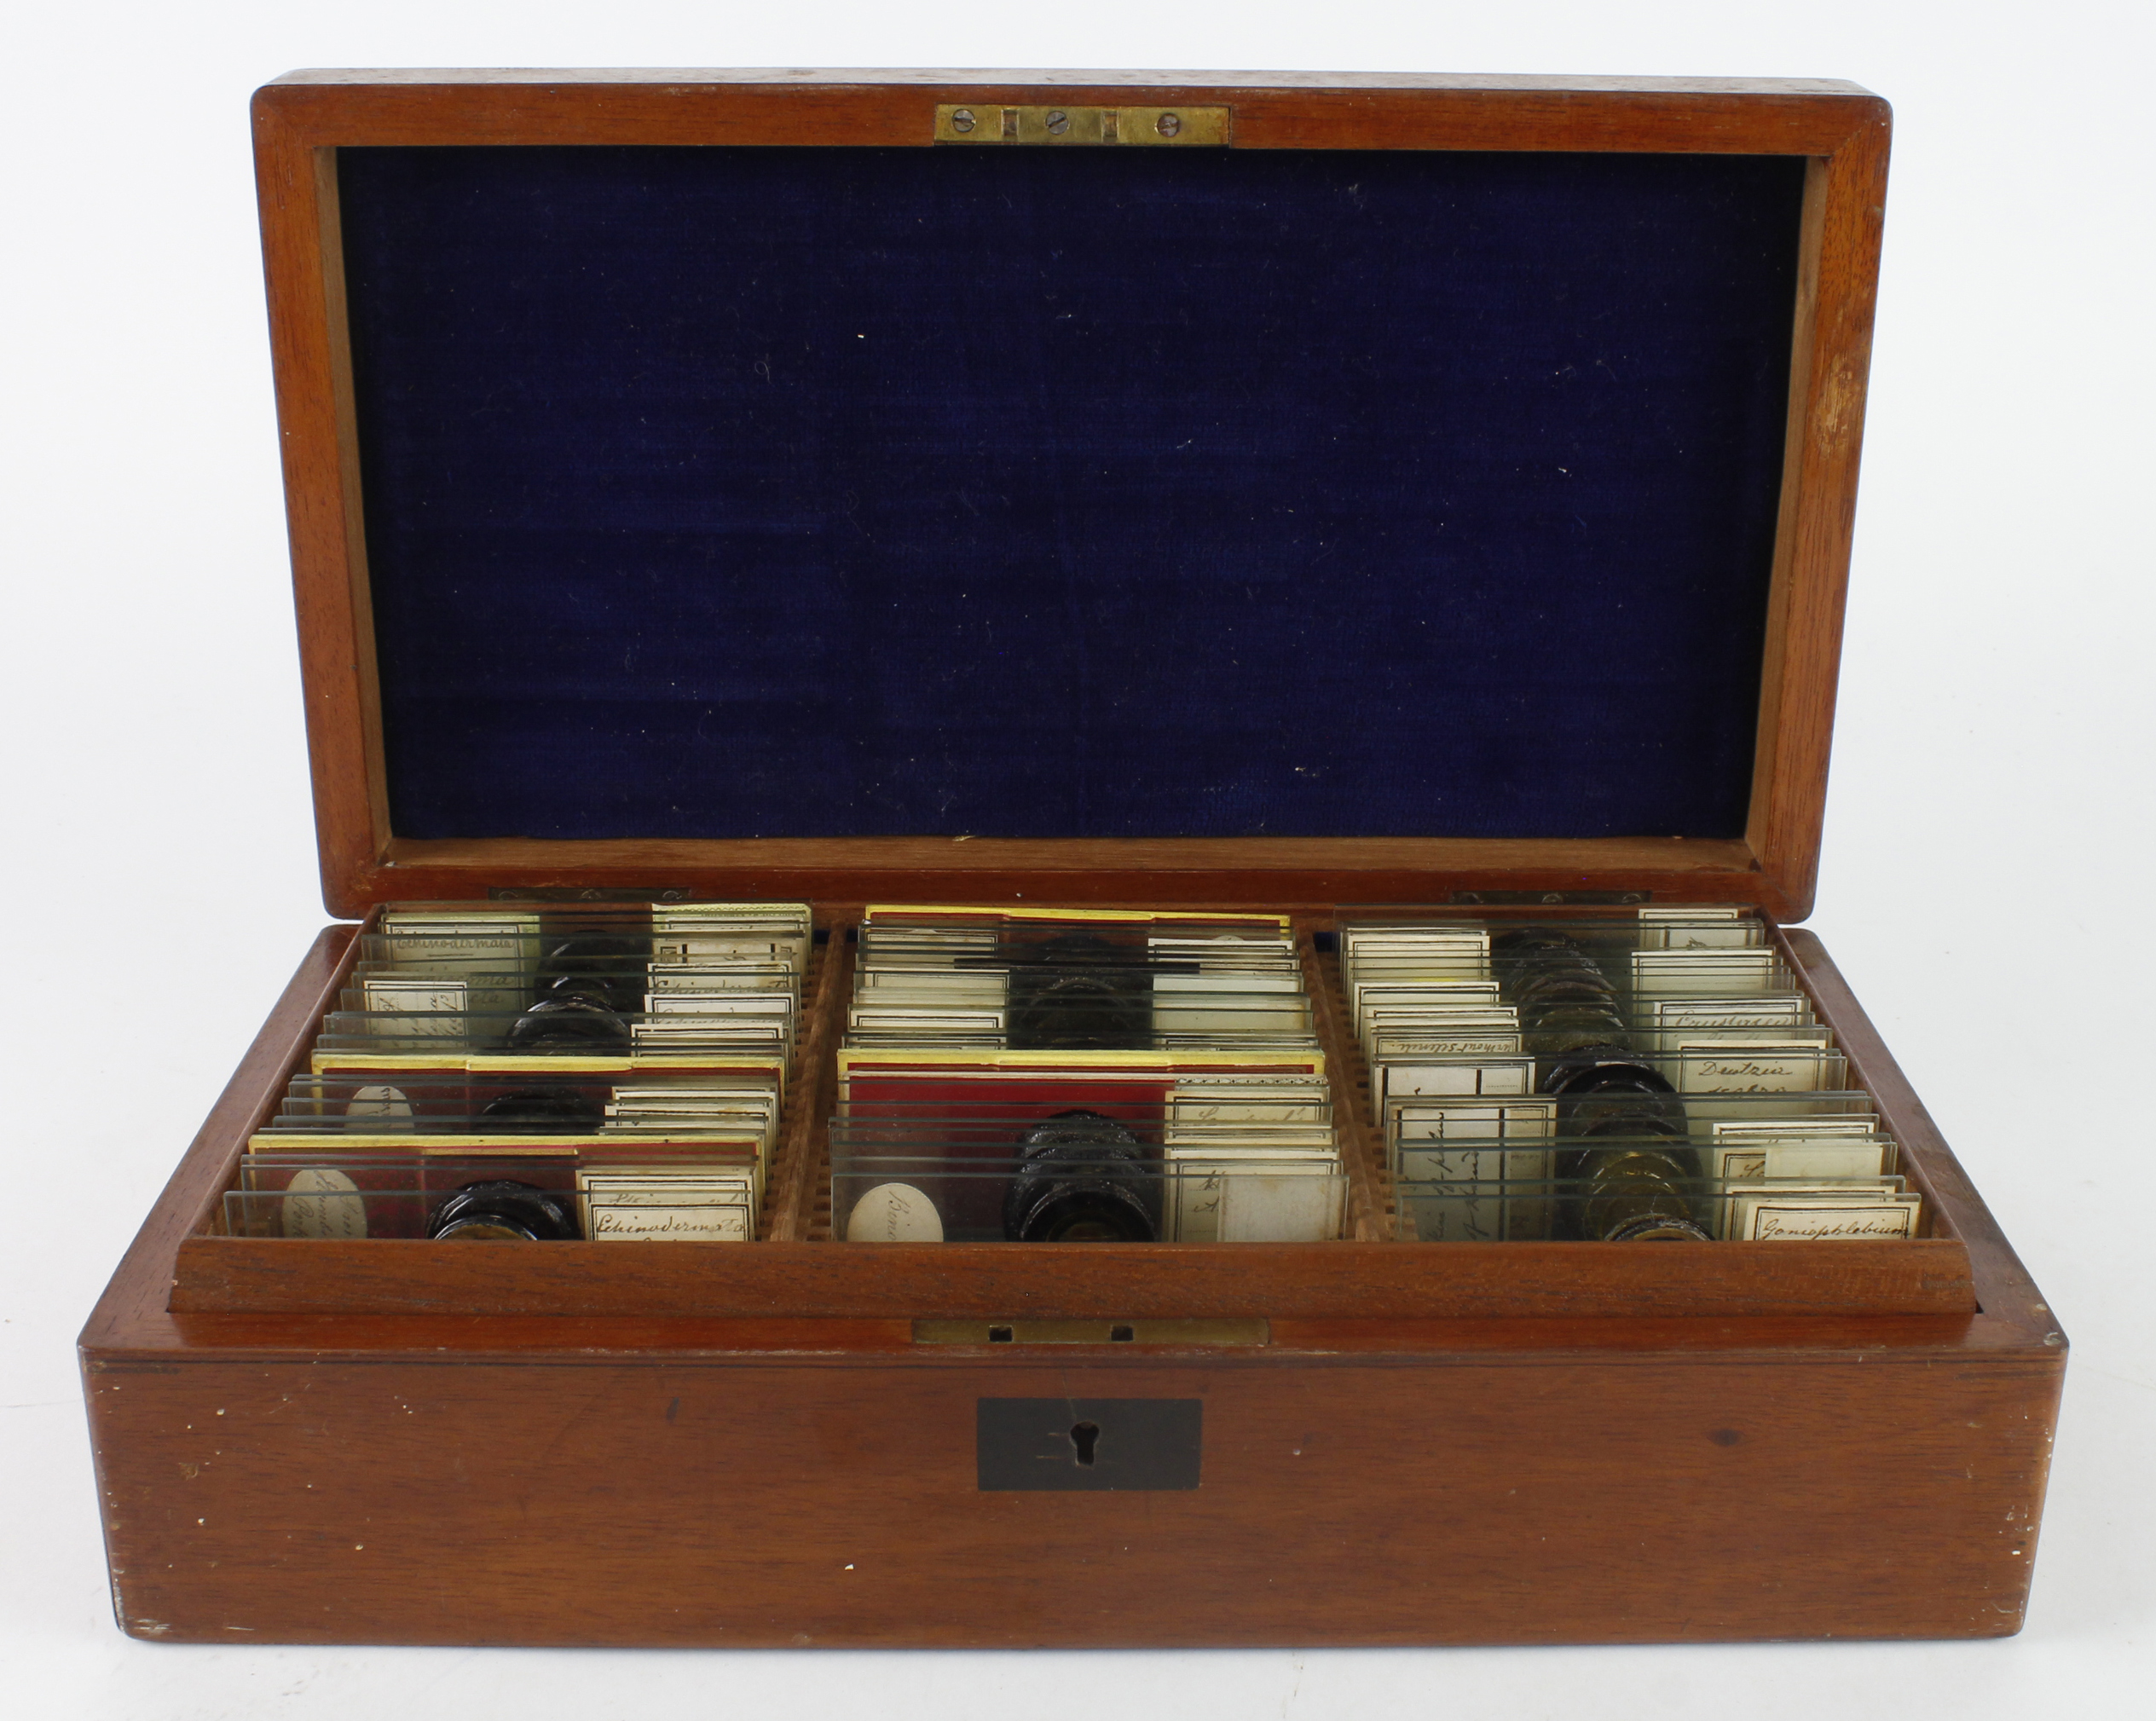 Microscope slides. A mahogany case containing approximately 110 glass slides over two layers, mostly